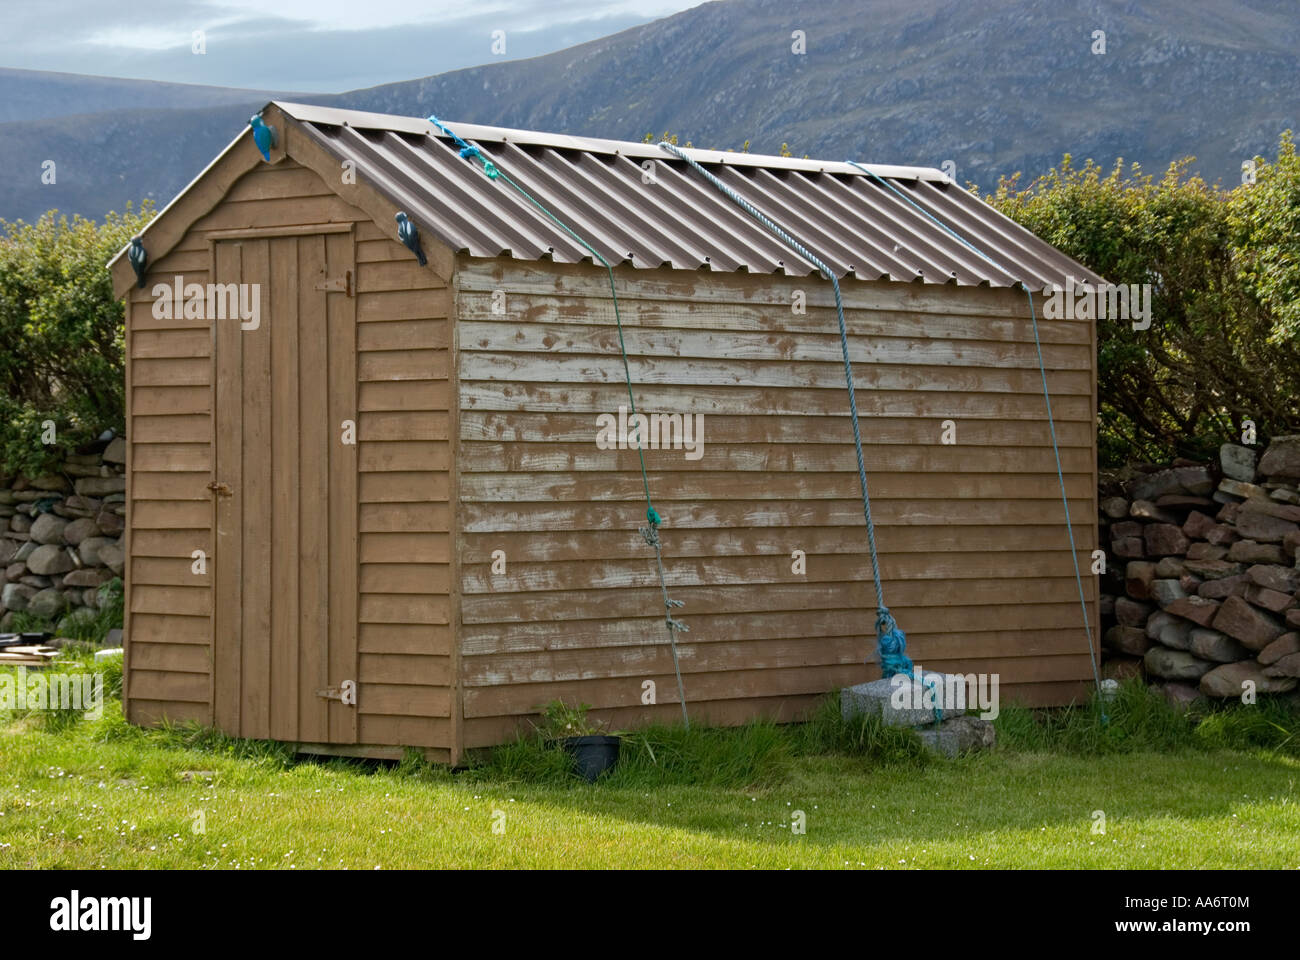 Garden shed with heavy weight to prevent roof being blown off in high wind. Stock Photo